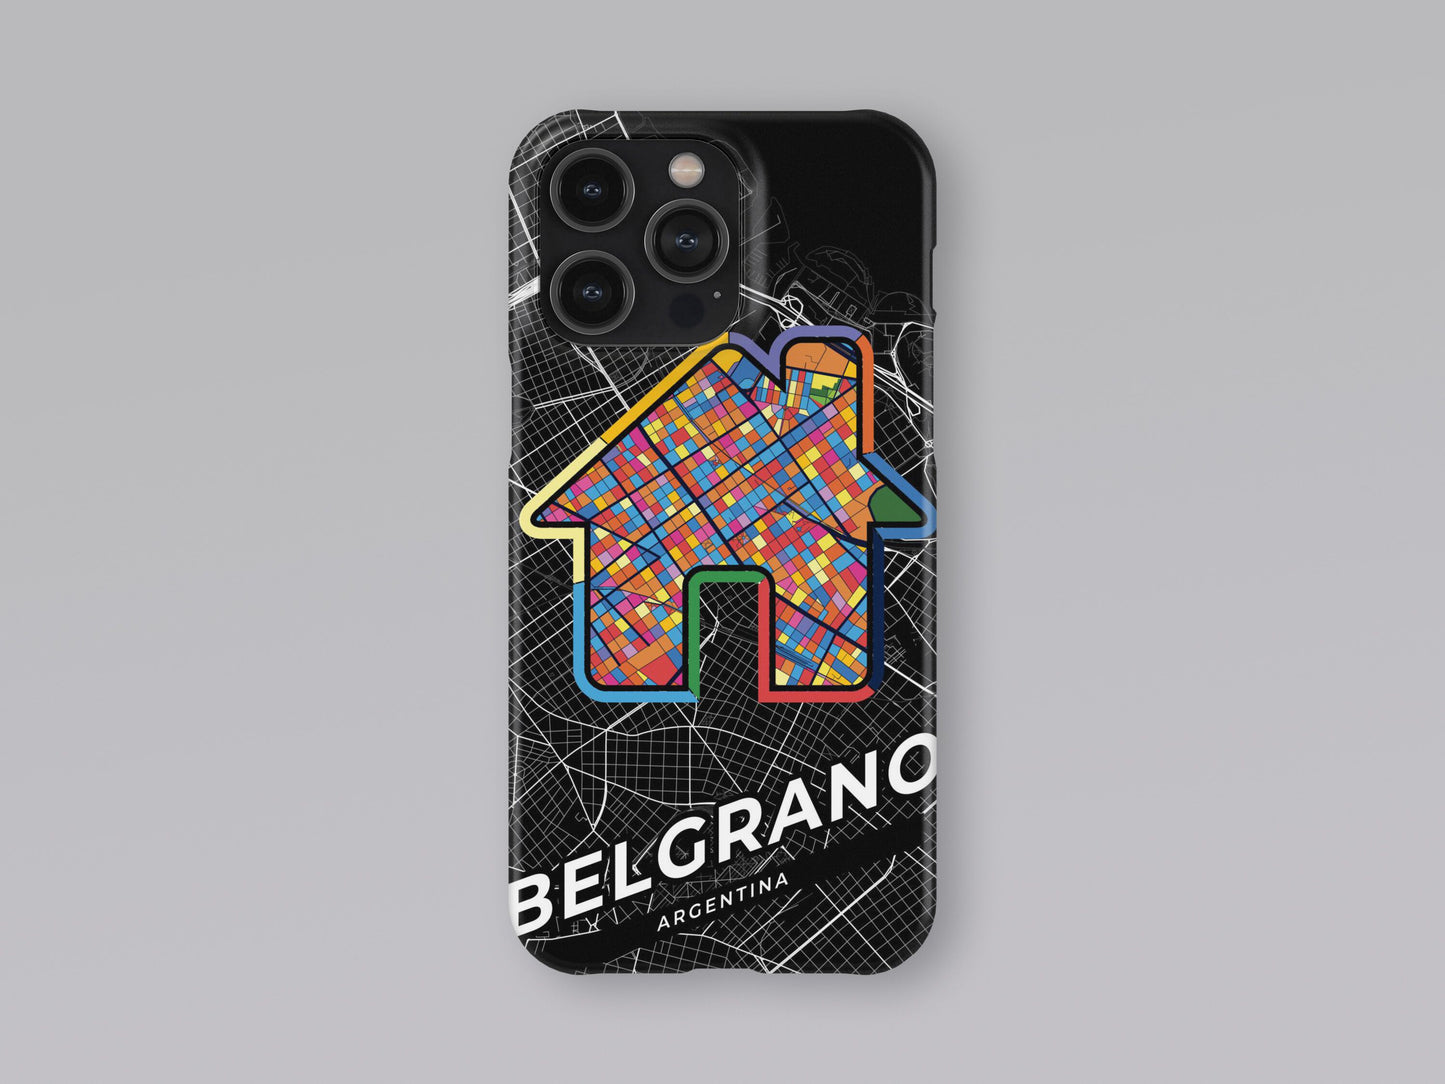 Belgrano Argentina slim phone case with colorful icon. Birthday, wedding or housewarming gift. Couple match cases. 3